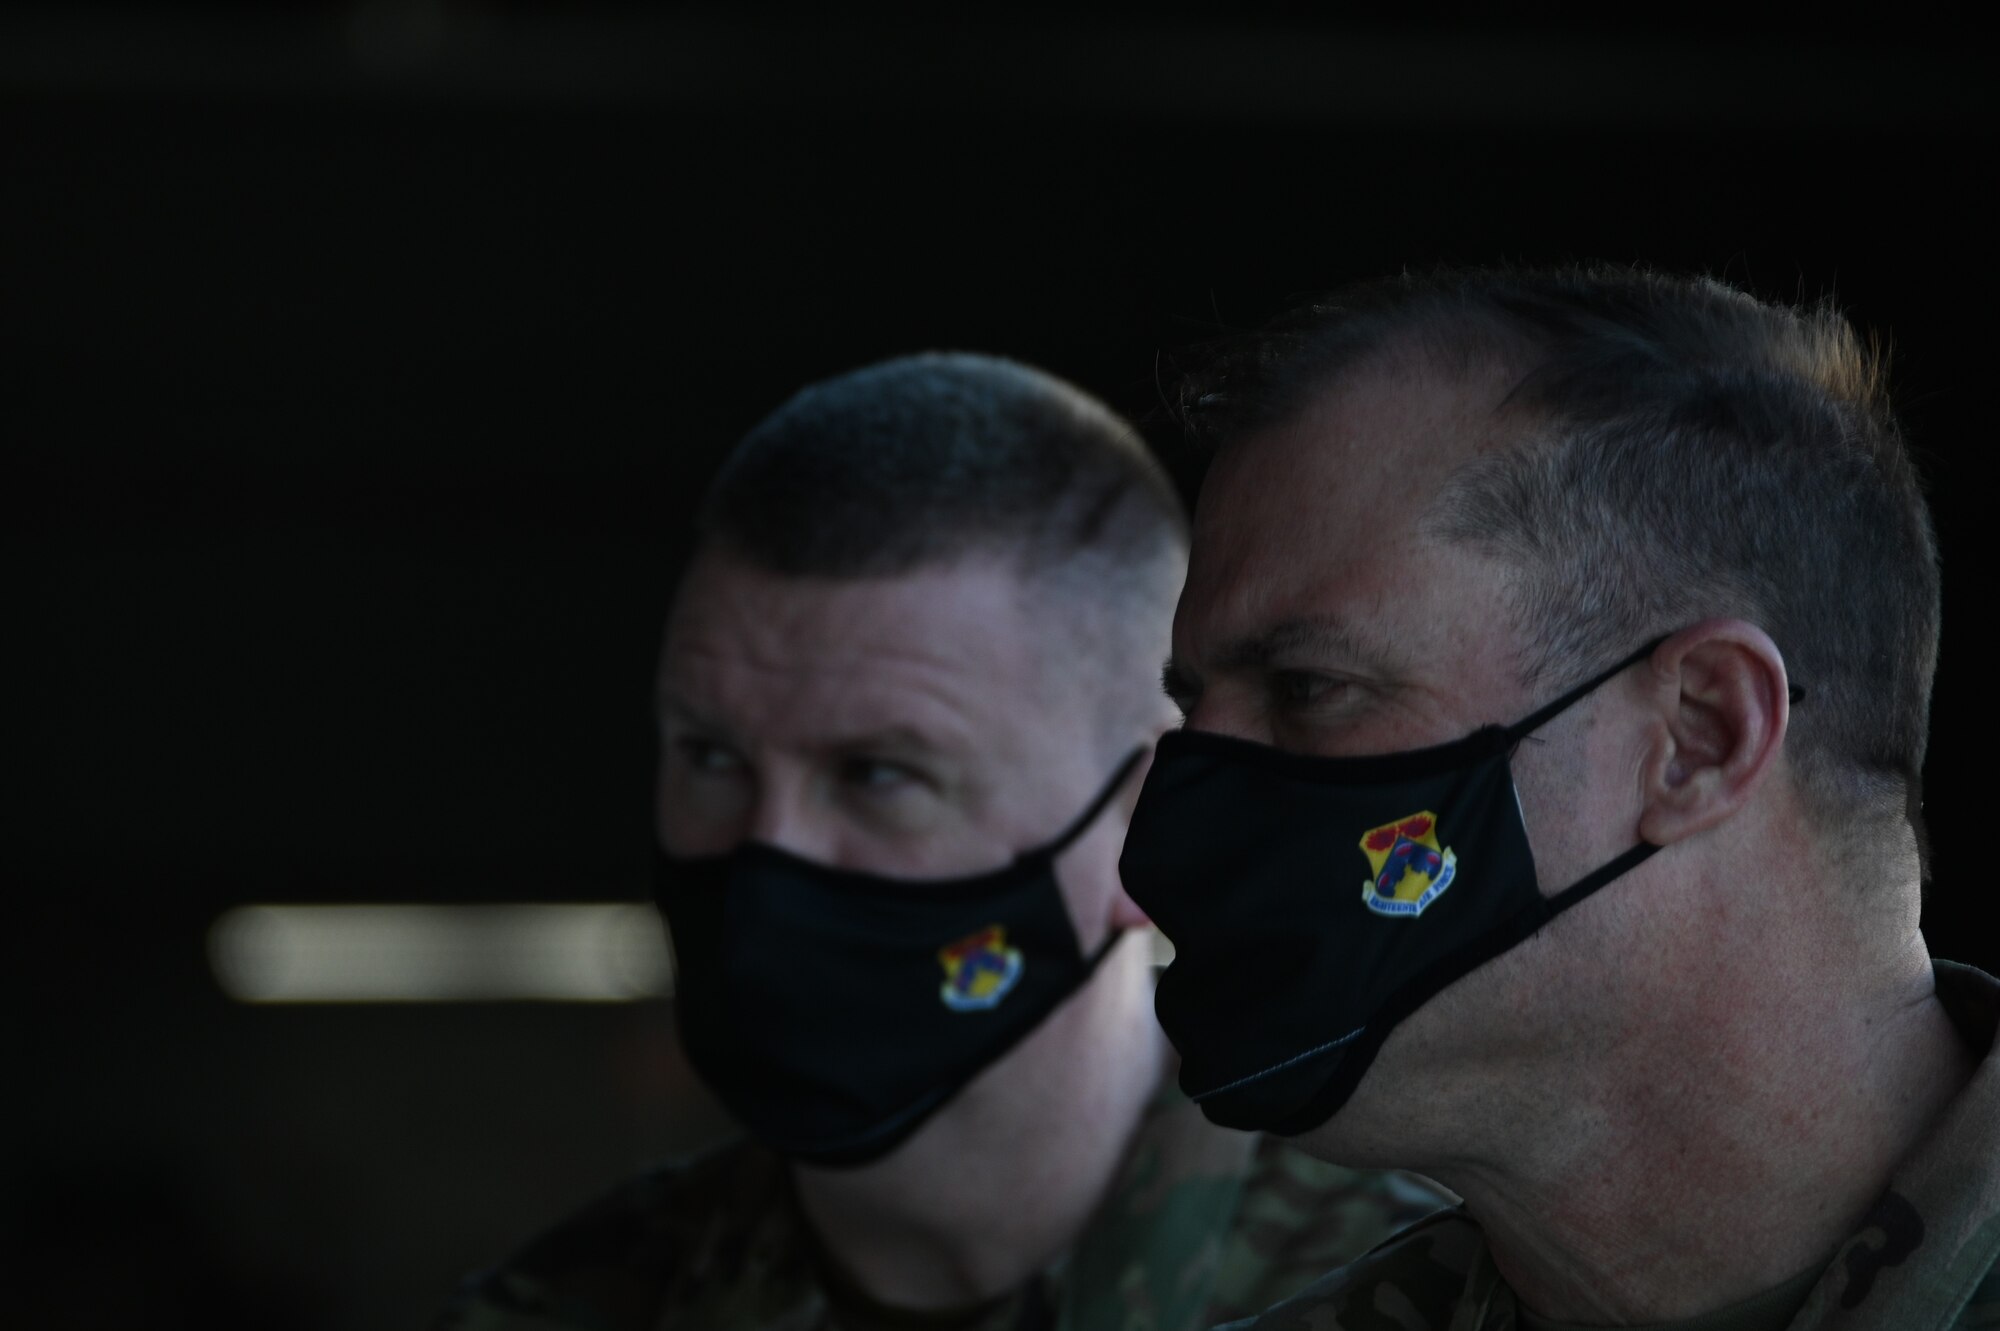 Two men in military uniforms and similar masks look intensely at an unknown source.